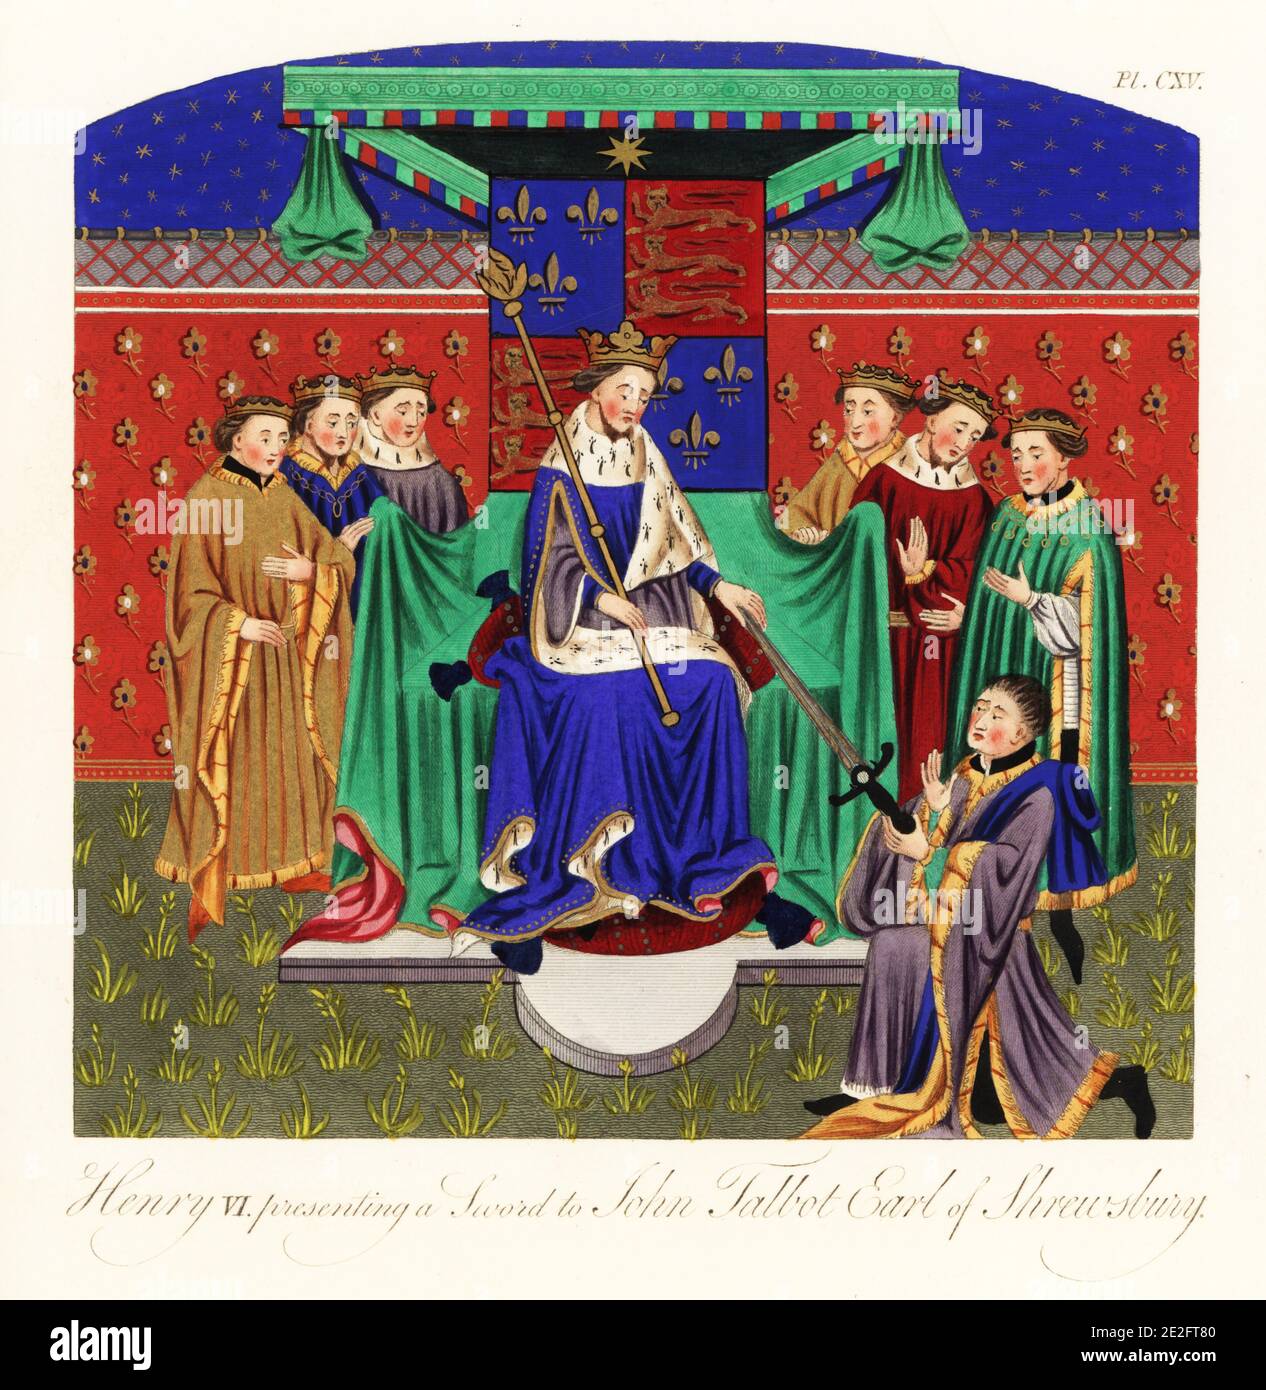 King Henry VI of England presenting a sword to John Talbot, 1st Earl of Shrewsbury, on his appointment to Constable of France. The king on his armorial throne in ermine robes with crown and sceptre, 15th century. From Christine de Pisan, Des fais d'armes et de chevalerie, f.405r, Talbot Shrewsbury Book, Royal MS 15 E vi, British Library. Handcoloured engraving by Joseph Strutt from his Complete View of the Dress and Habits of the People of England, Henry Bohn, London, 1842. Stock Photo